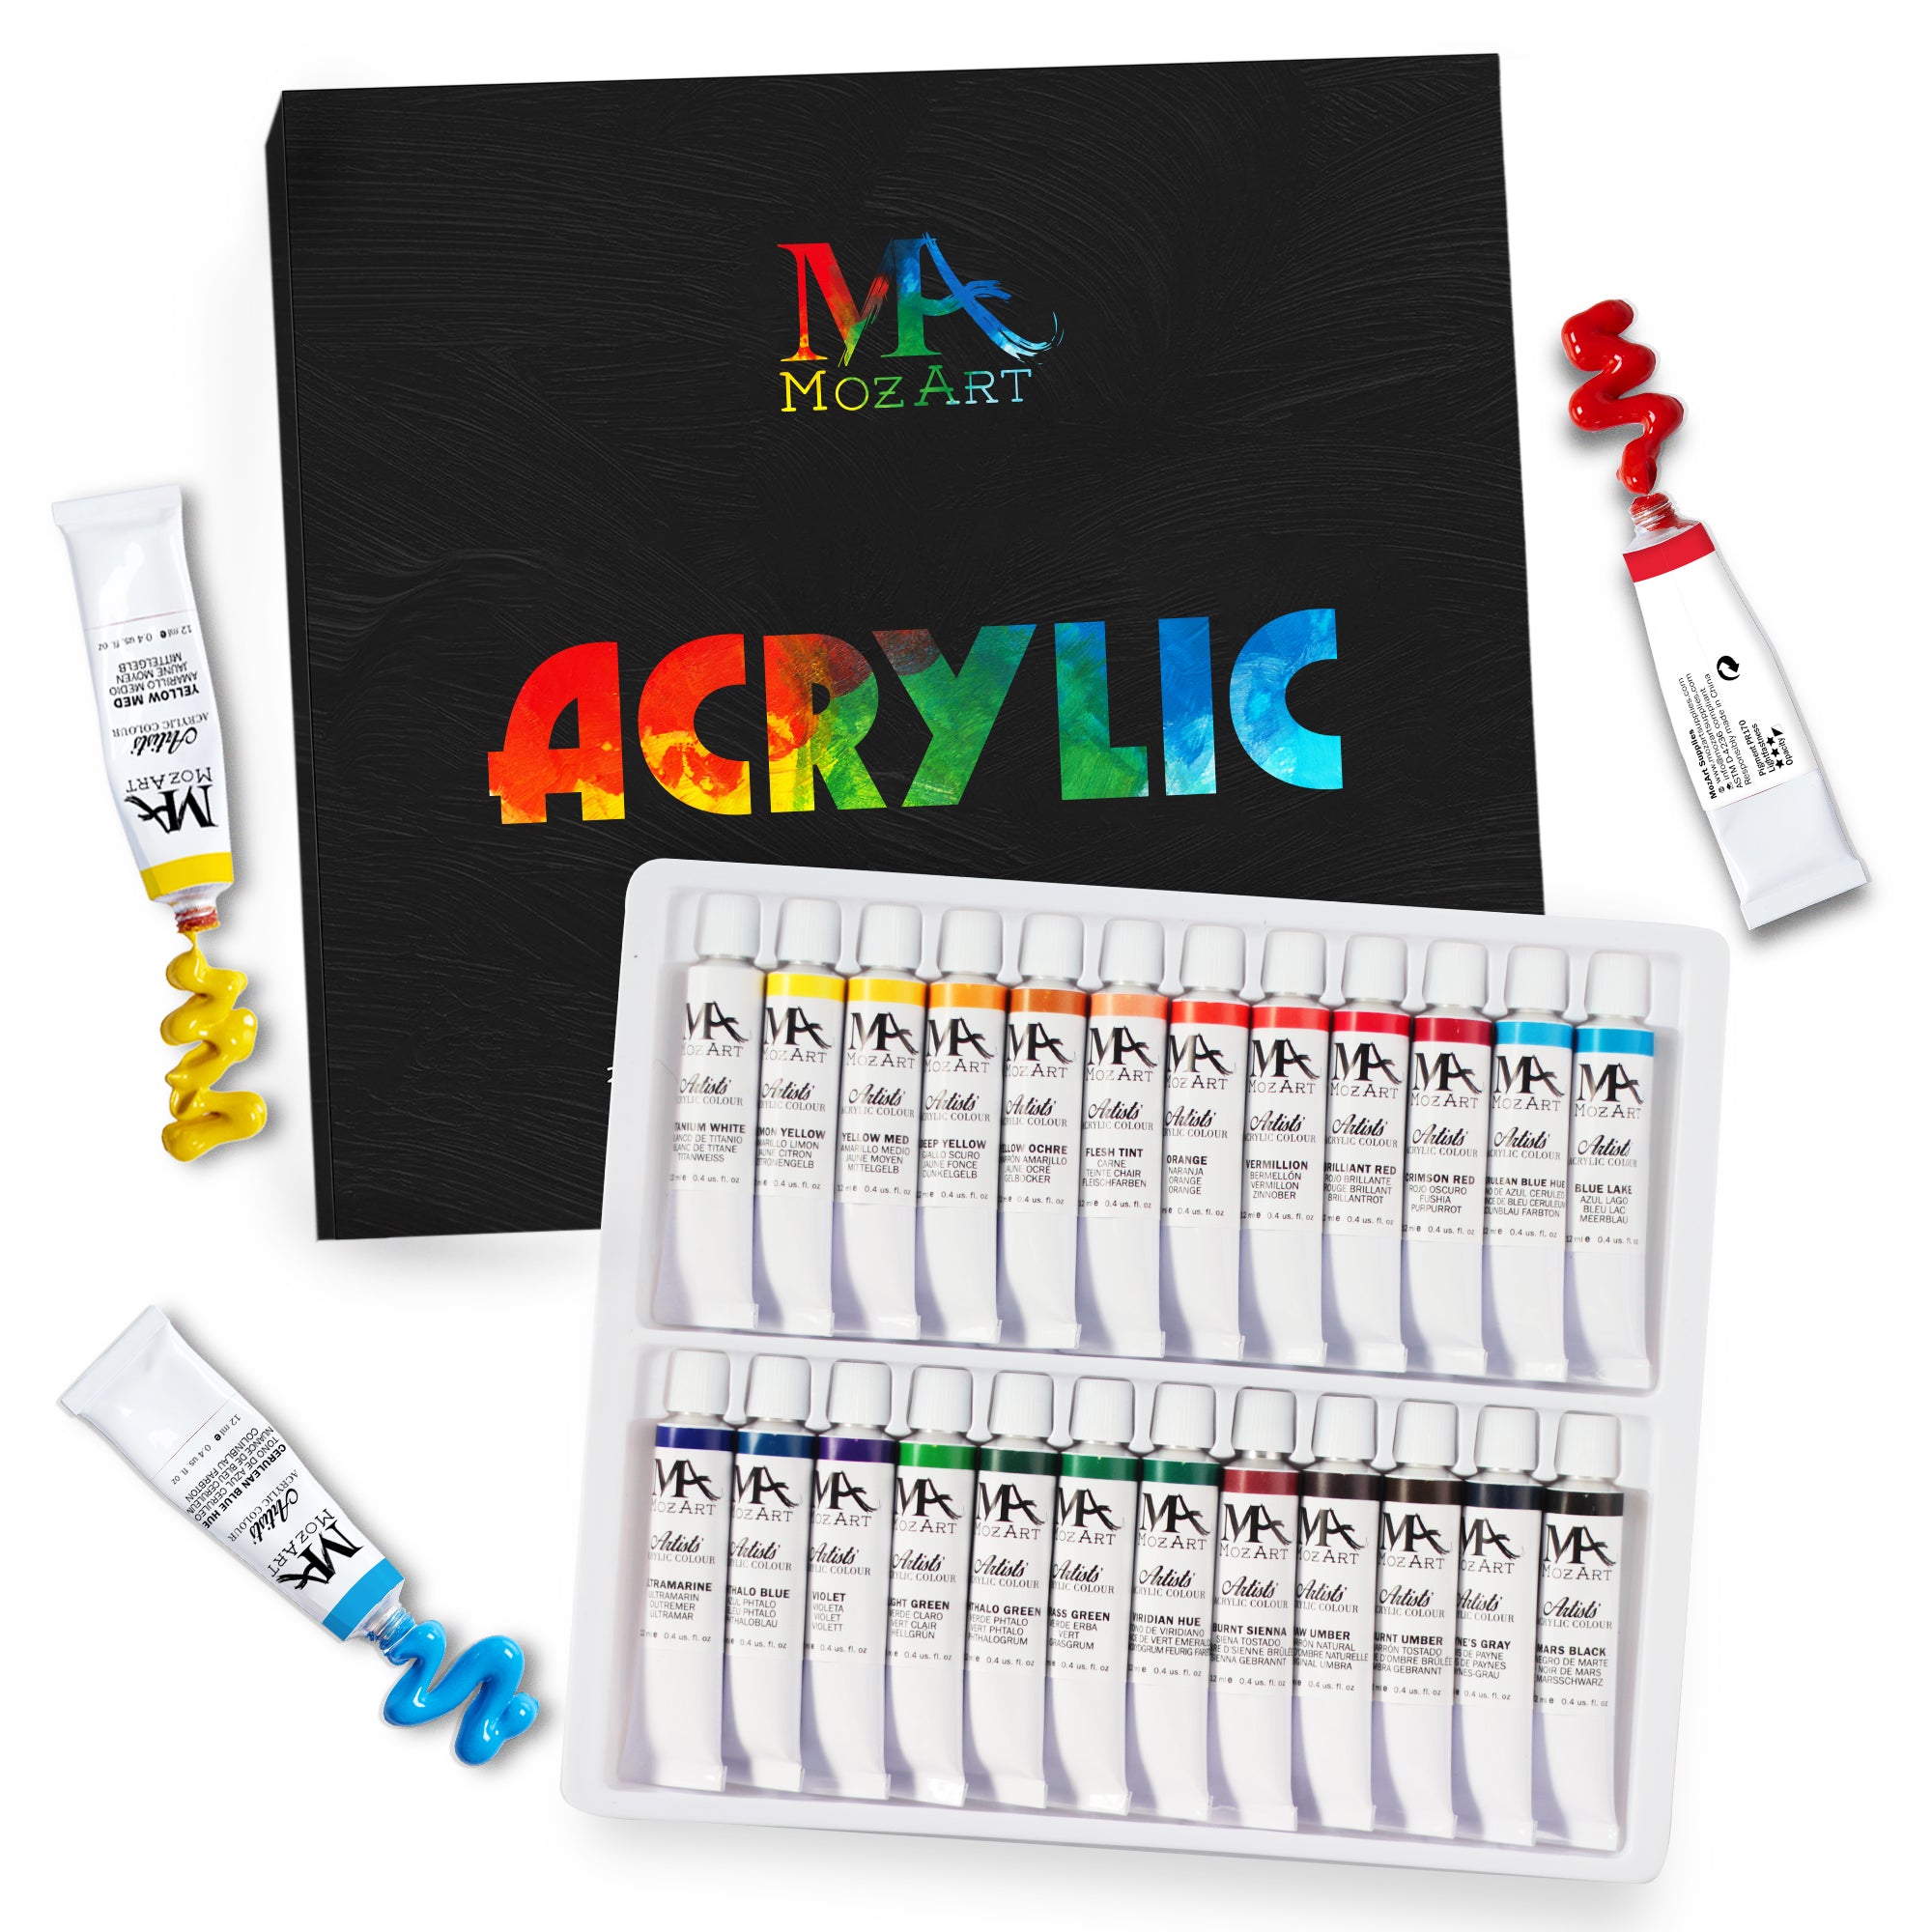 Swatch and review of Tooli-Art PASTEL acrylic paint pens 24 SET 